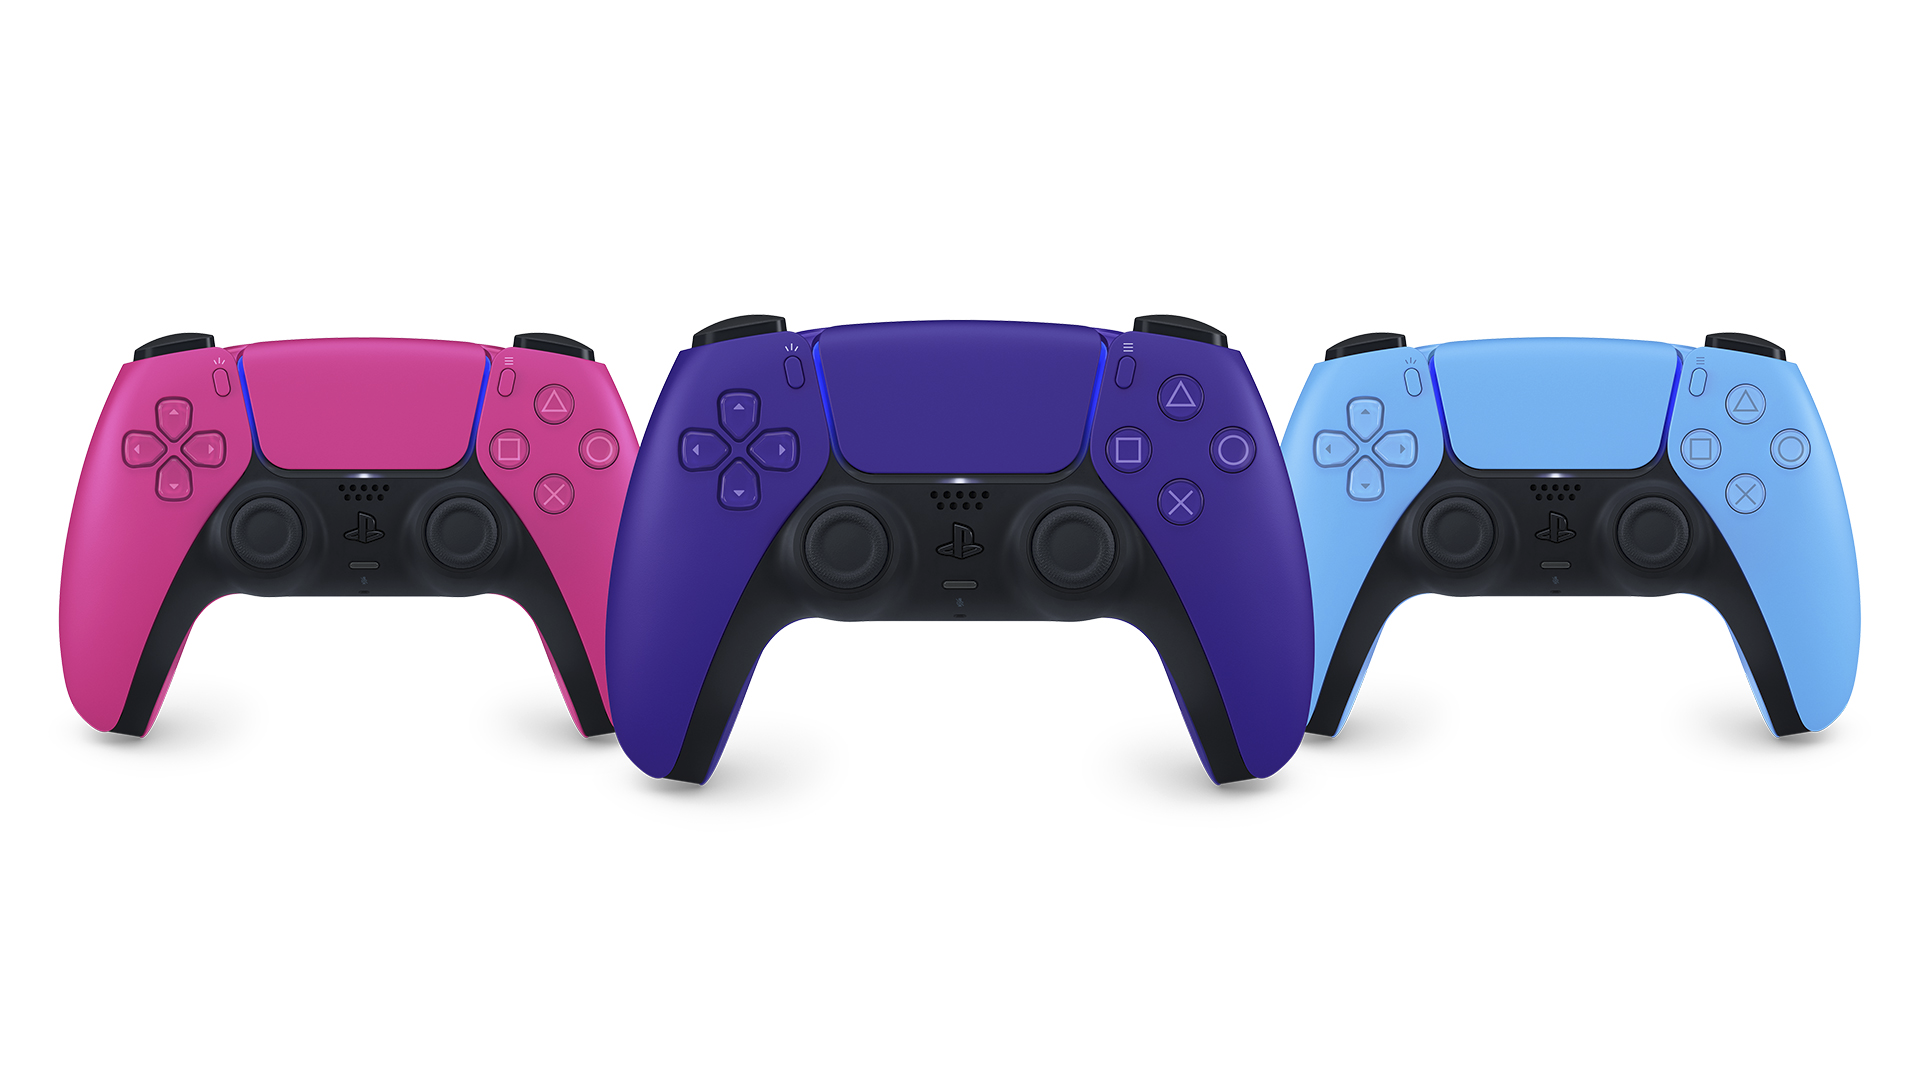 Composite of three dualsense controllers, side by side, in Nova Pink, Starlight Blue and Galactic Purple